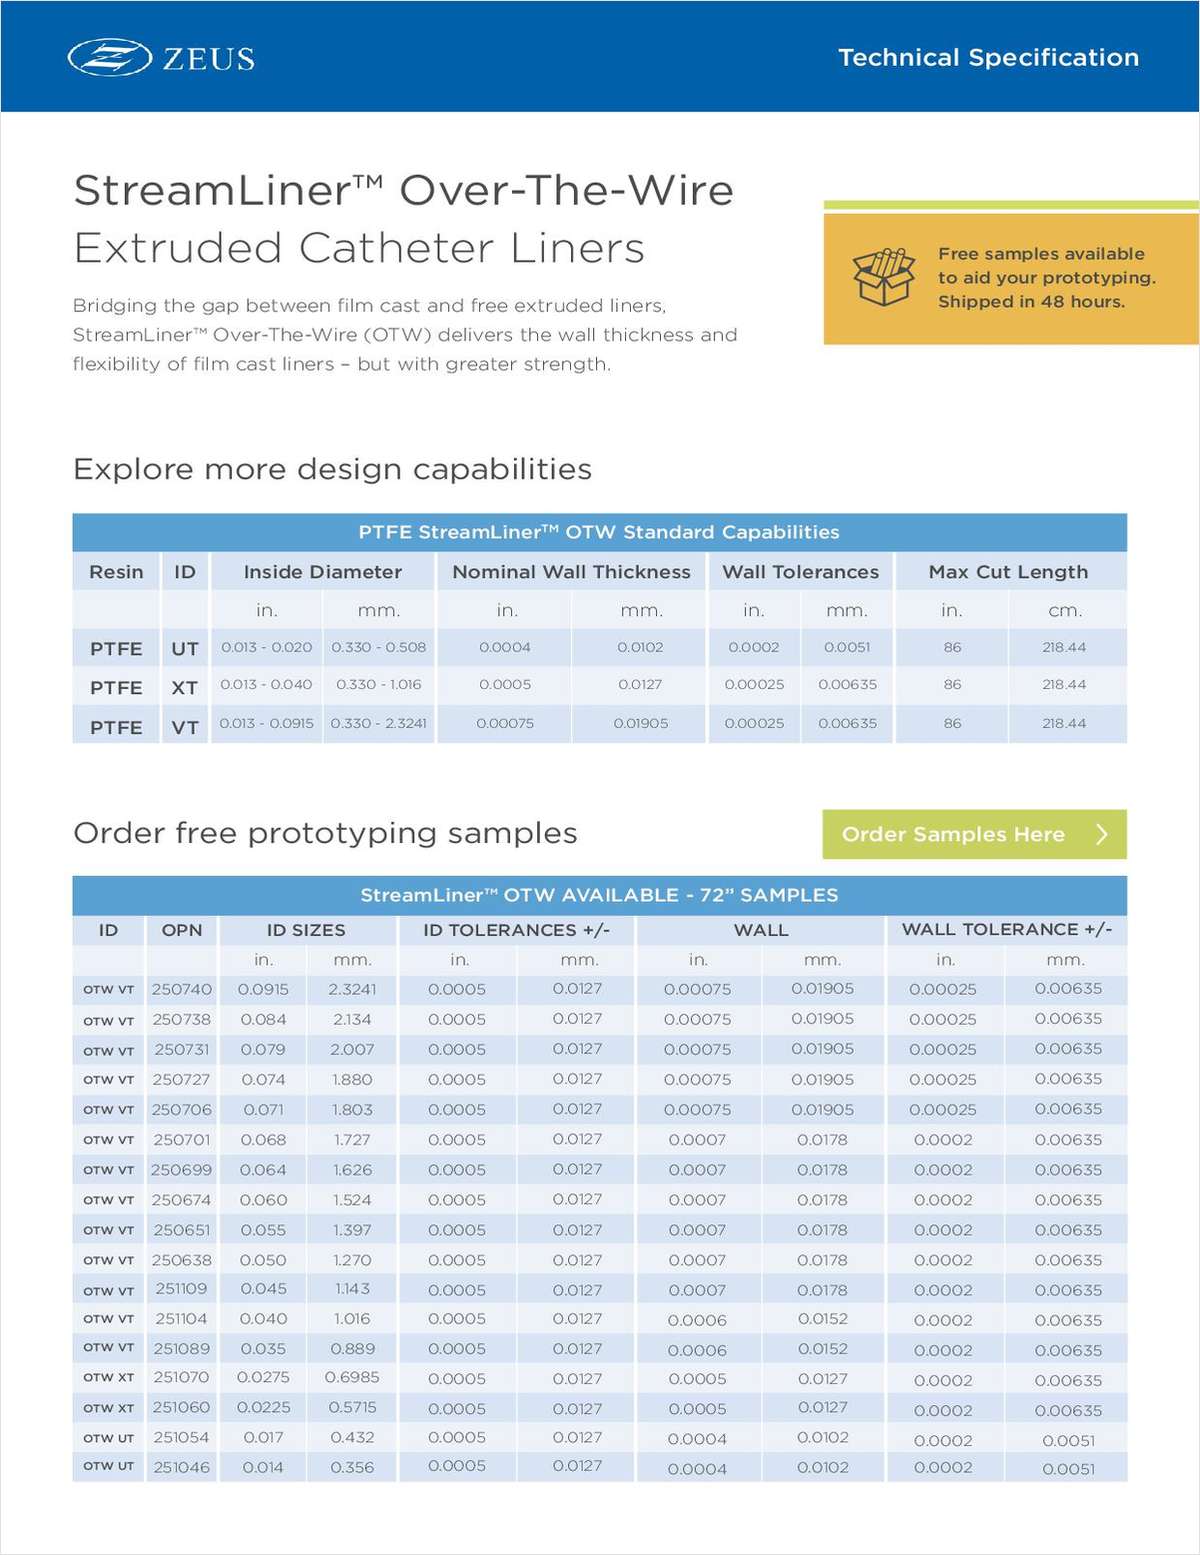 Extruded Over-The-Wire, This New PTFE Catheter Liner Enables Medical Device Manufacturers to Develop Safer, Smoother and Stronger Catheters